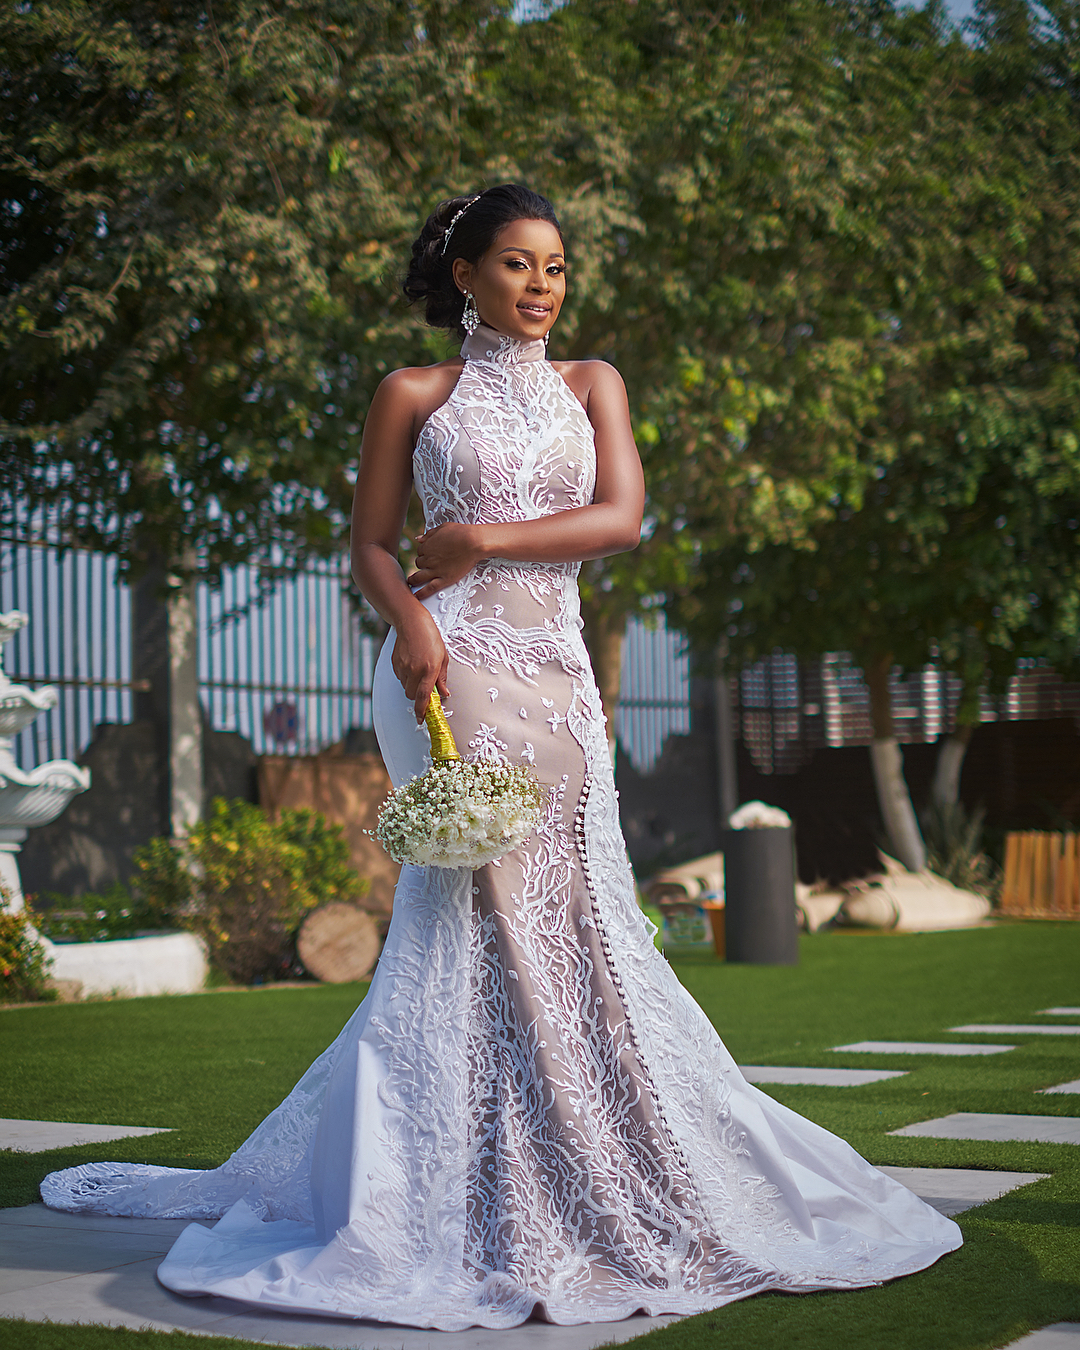 Check Out These Fashionable Wedding Gown Styles By Sima Brew